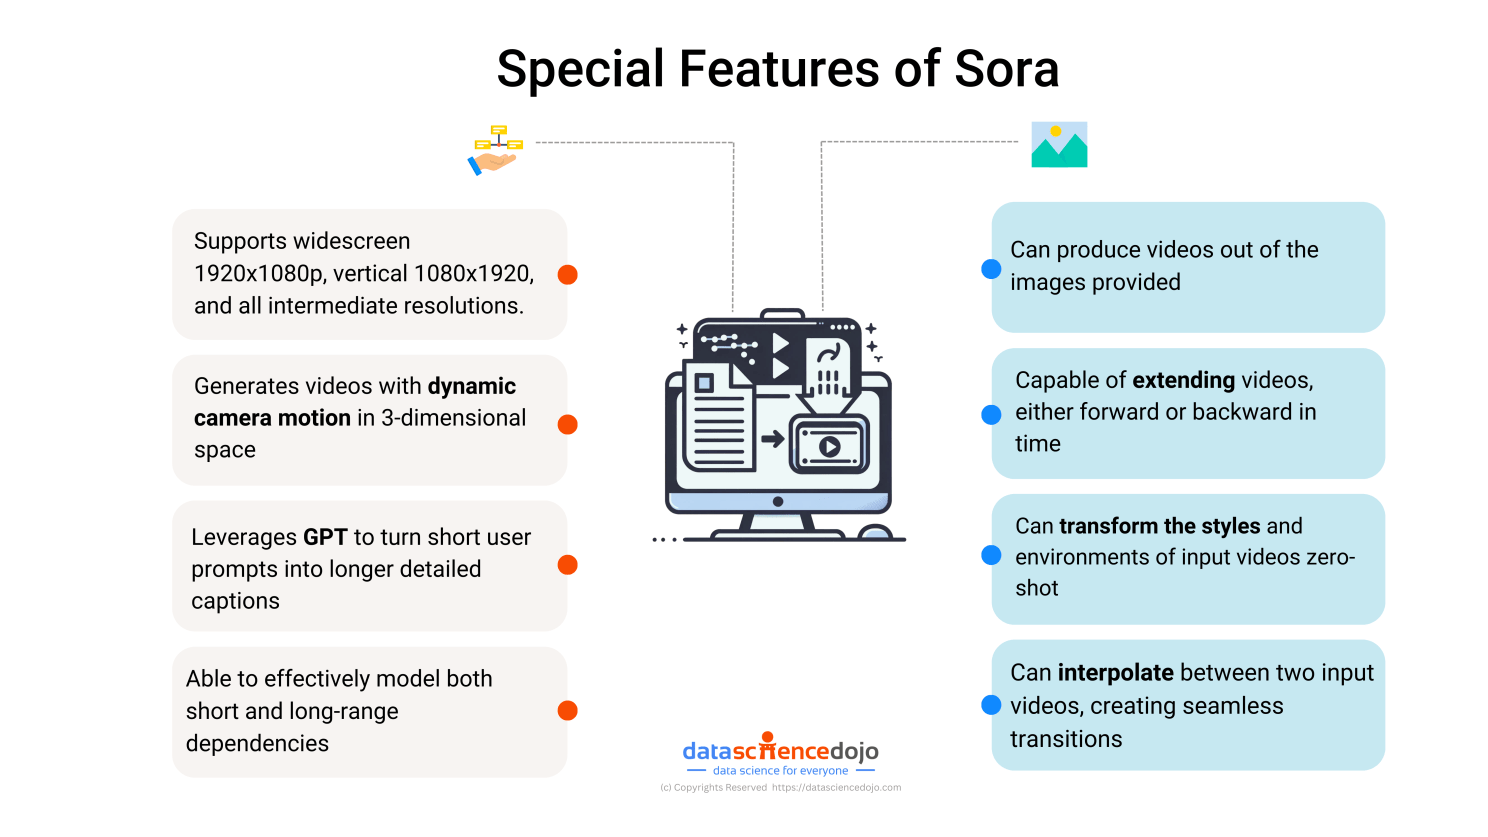 Special Features of Sora by OpenAI